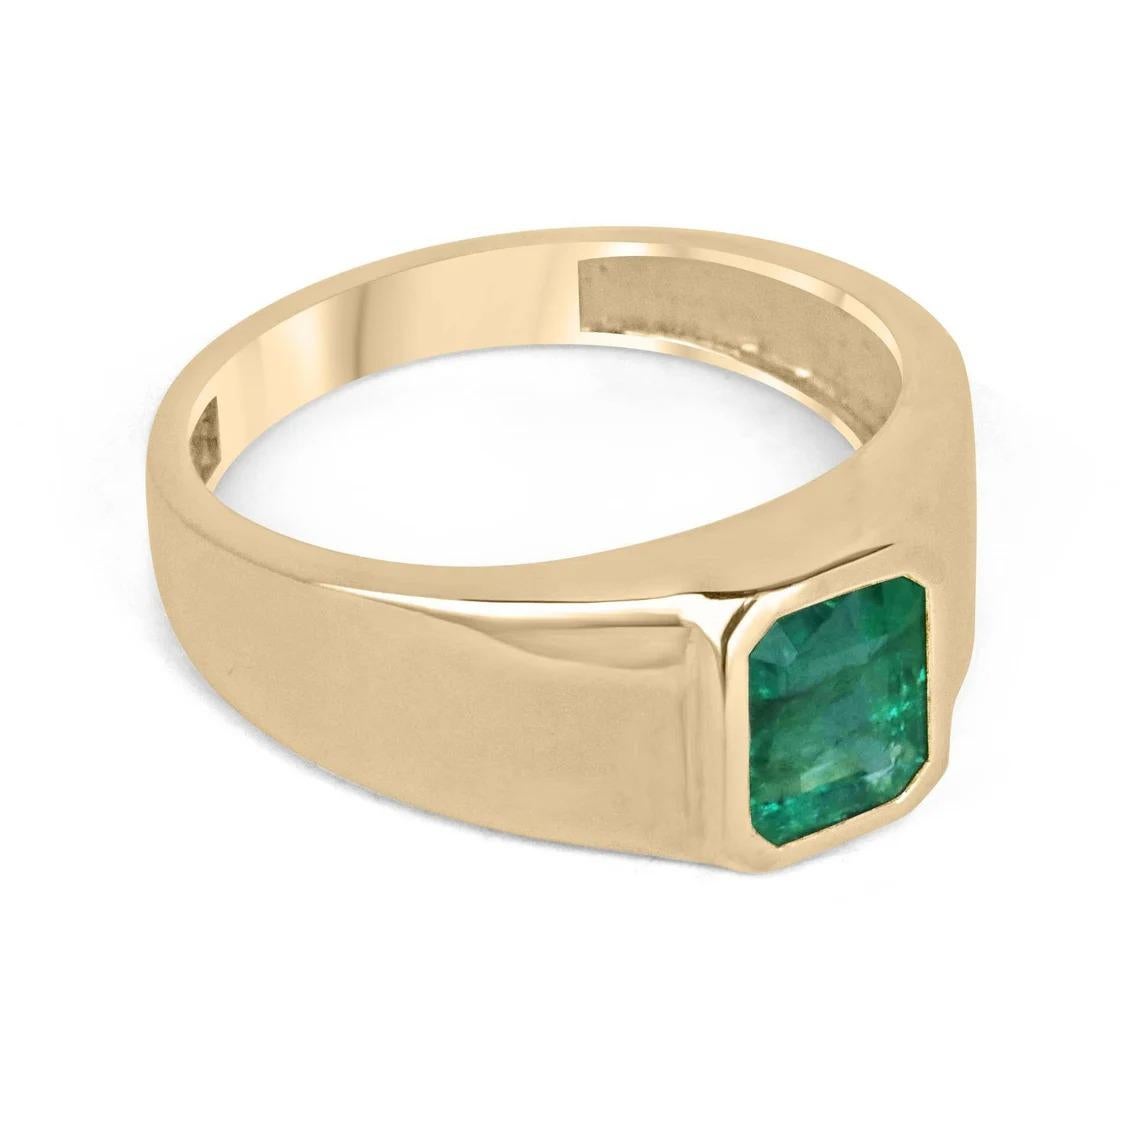 Presenting a distinguished men's emerald solitaire gold ring, featuring a remarkable 2.65-carat emerald of great quality. The emerald, boasting a lush dark green color with semi-transparent clarity and very good luster, takes center stage as it is